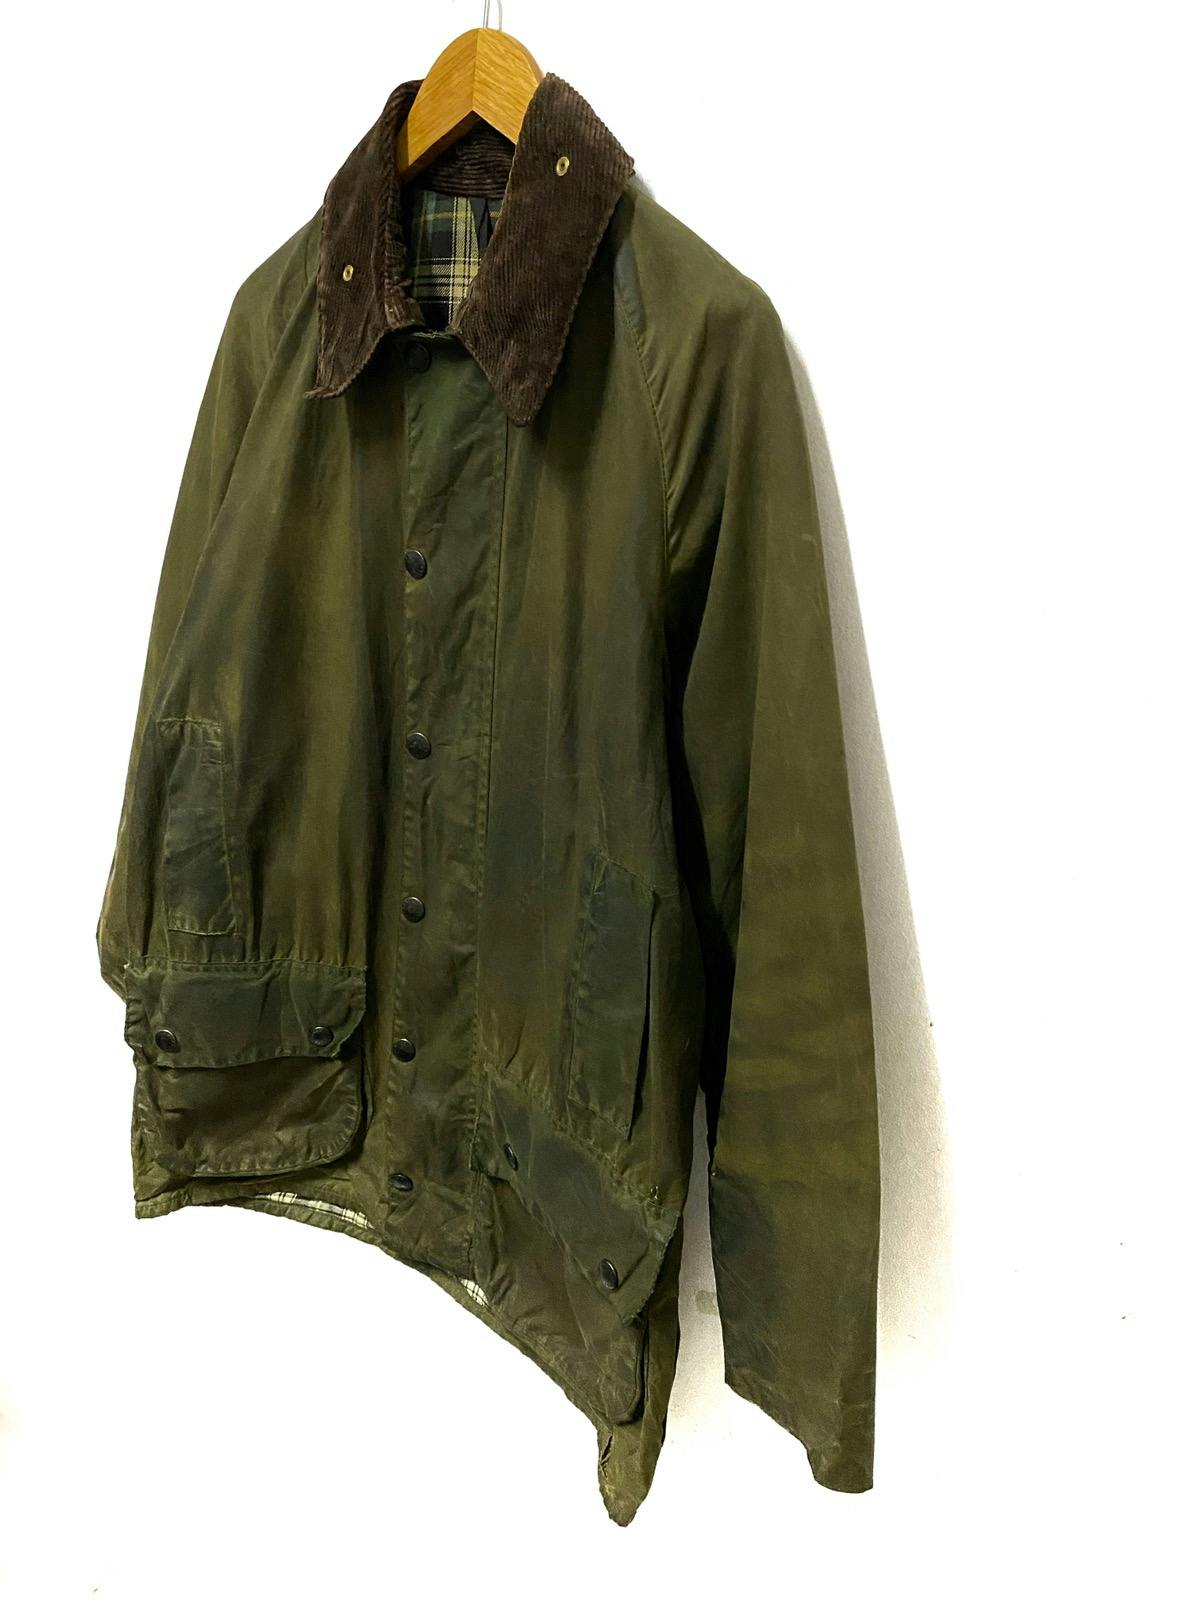 Vintage Barbour A150 Beaufort Wax Jacket Made in England - 5